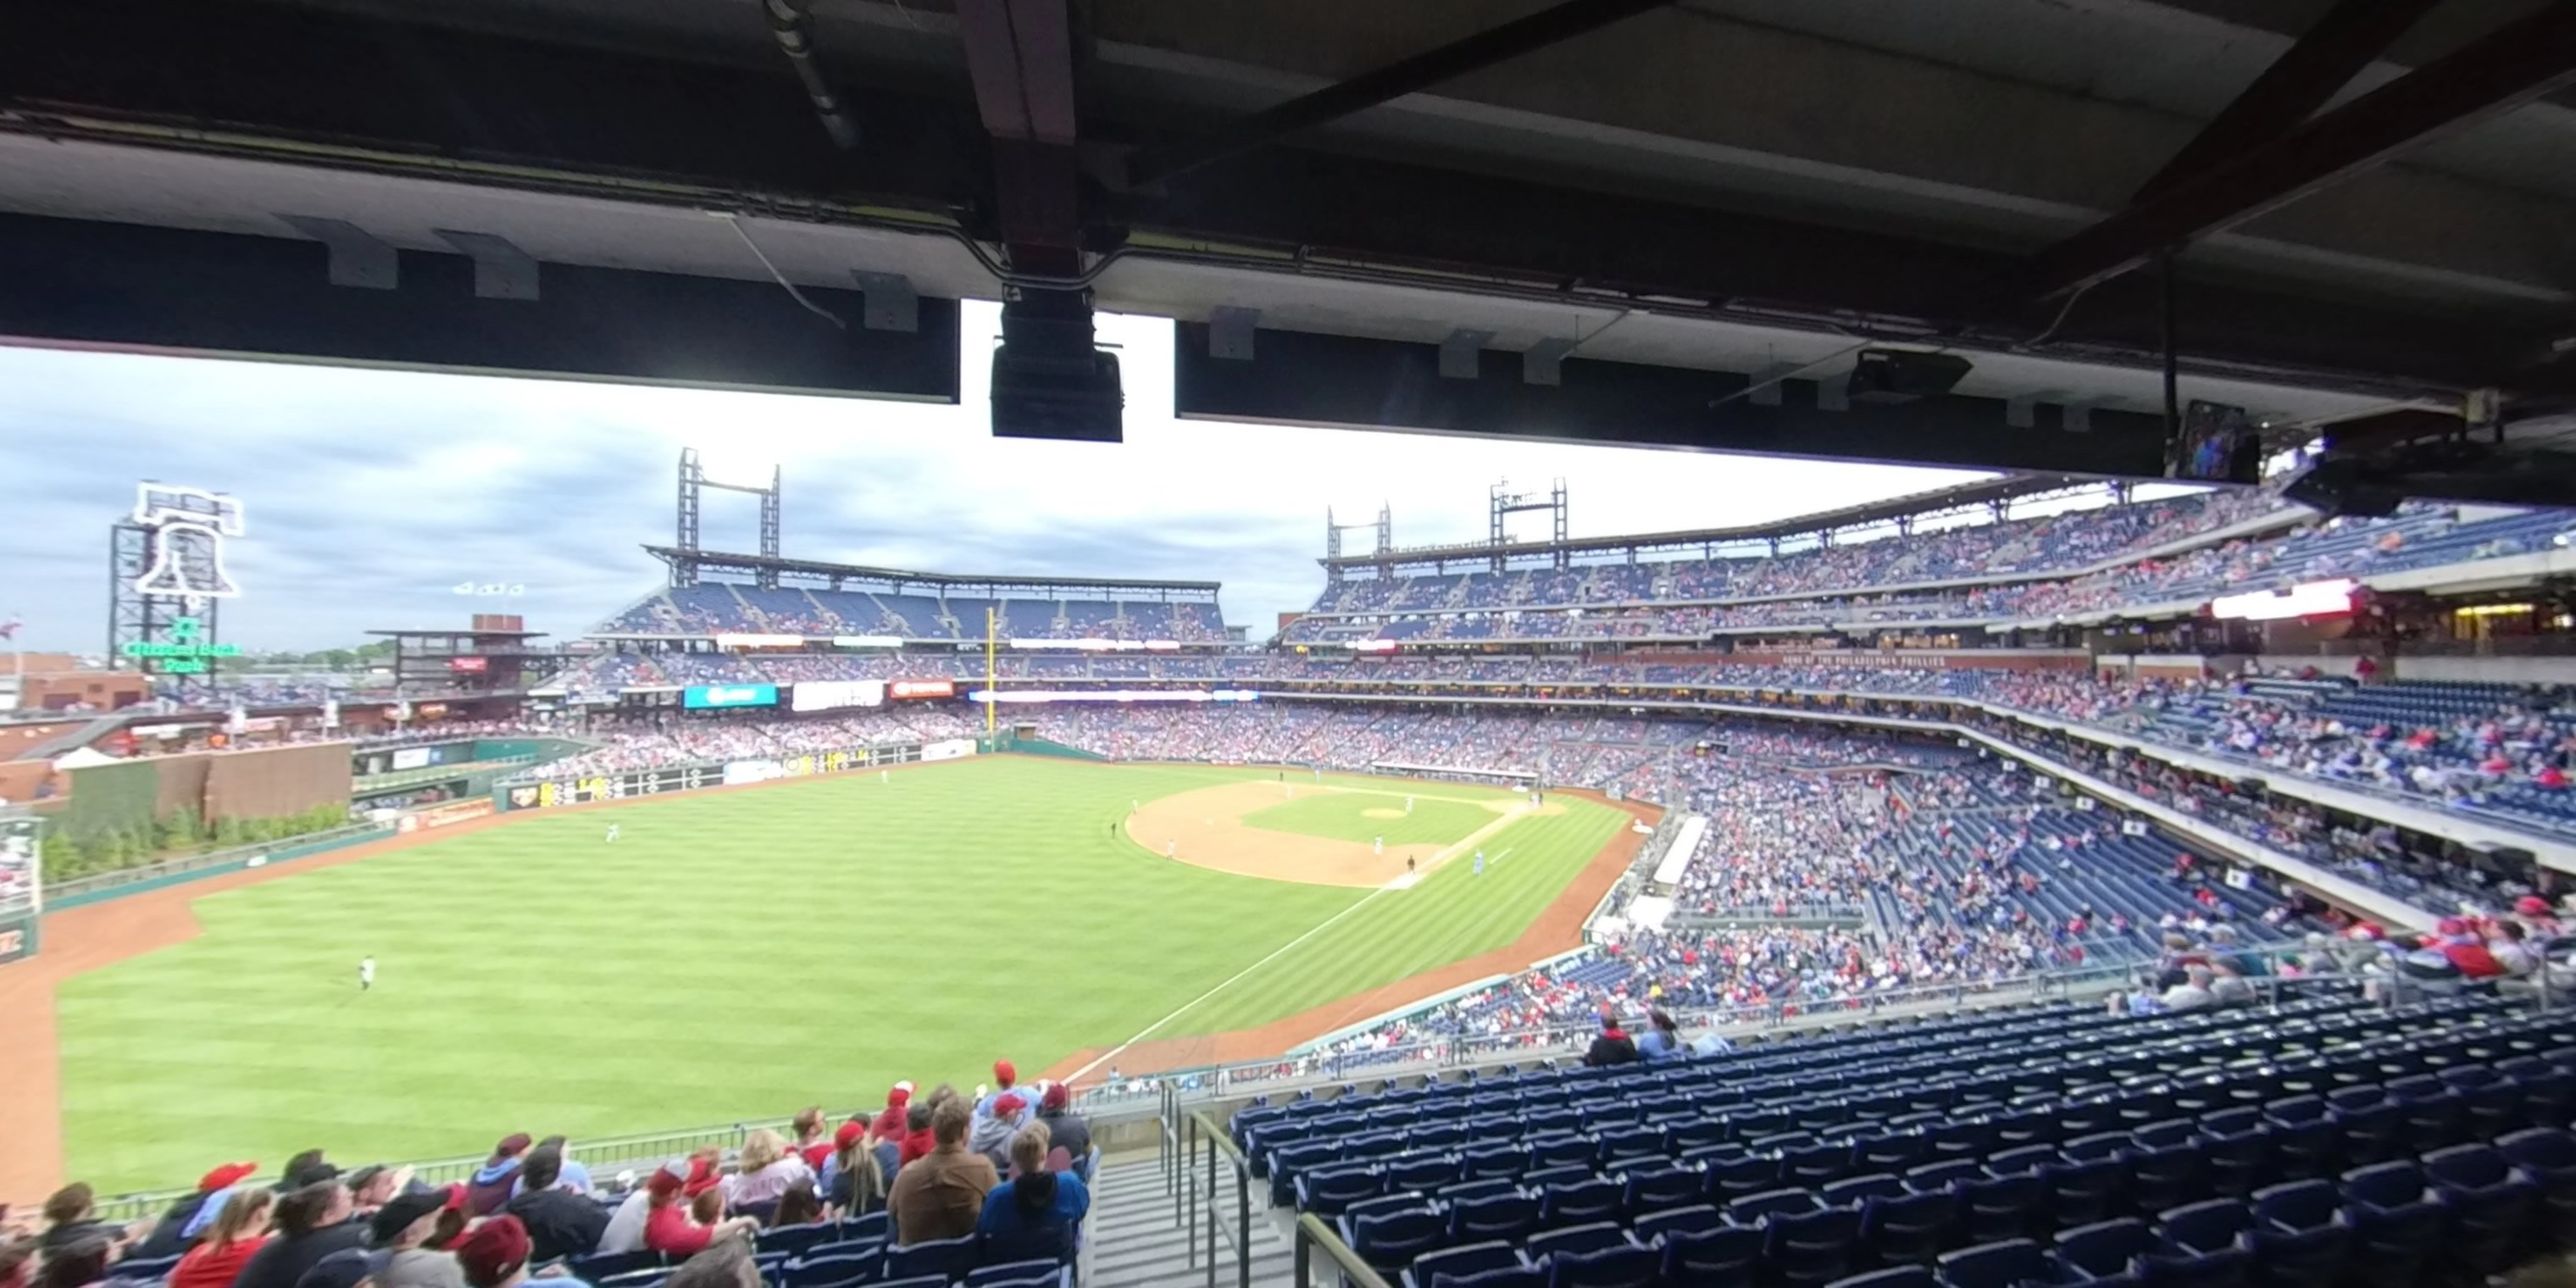 section 234 panoramic seat view  for baseball - citizens bank park